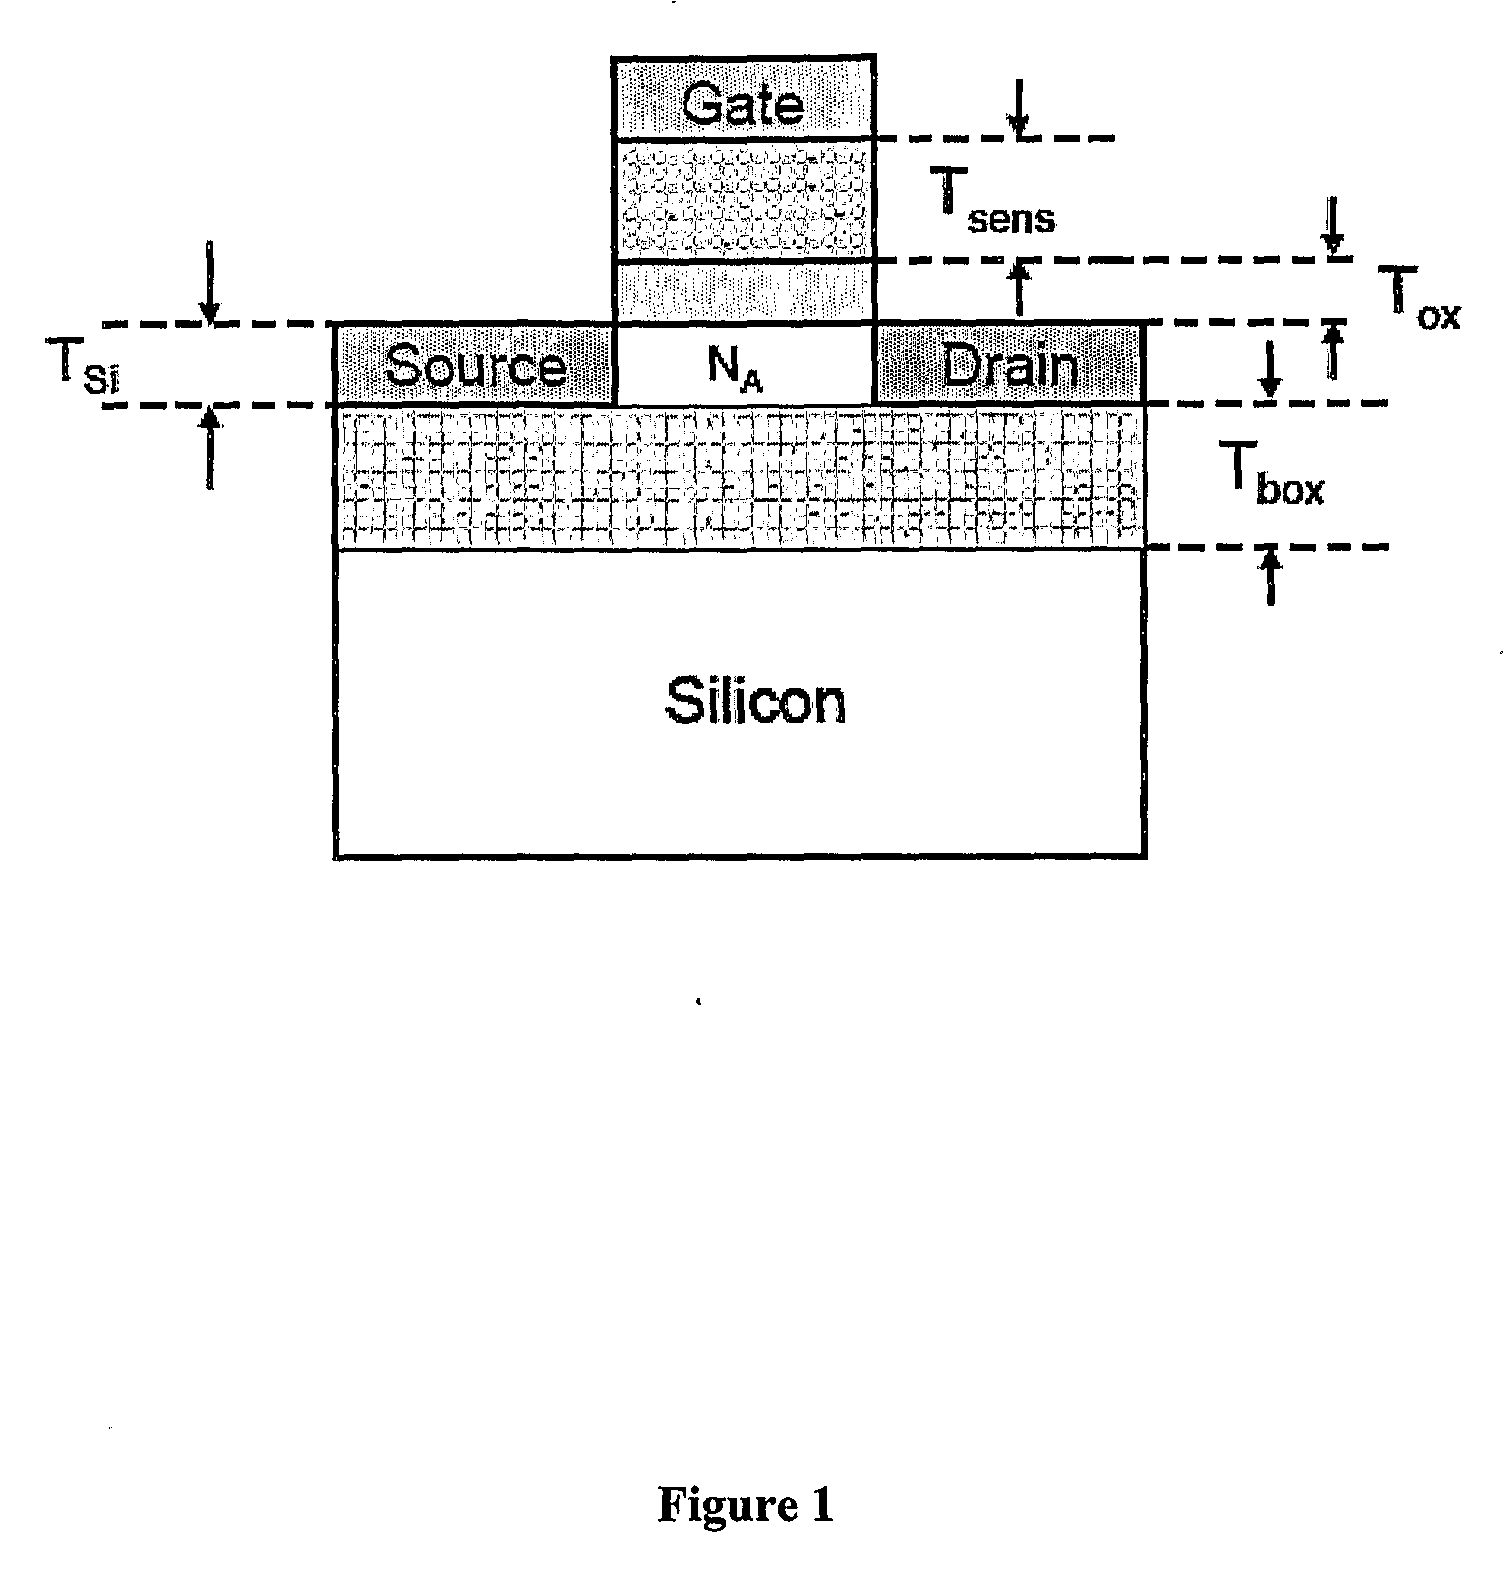 Sub-Threshold Capfet Sensor for Sensing Analyte, A Method and System Thereof